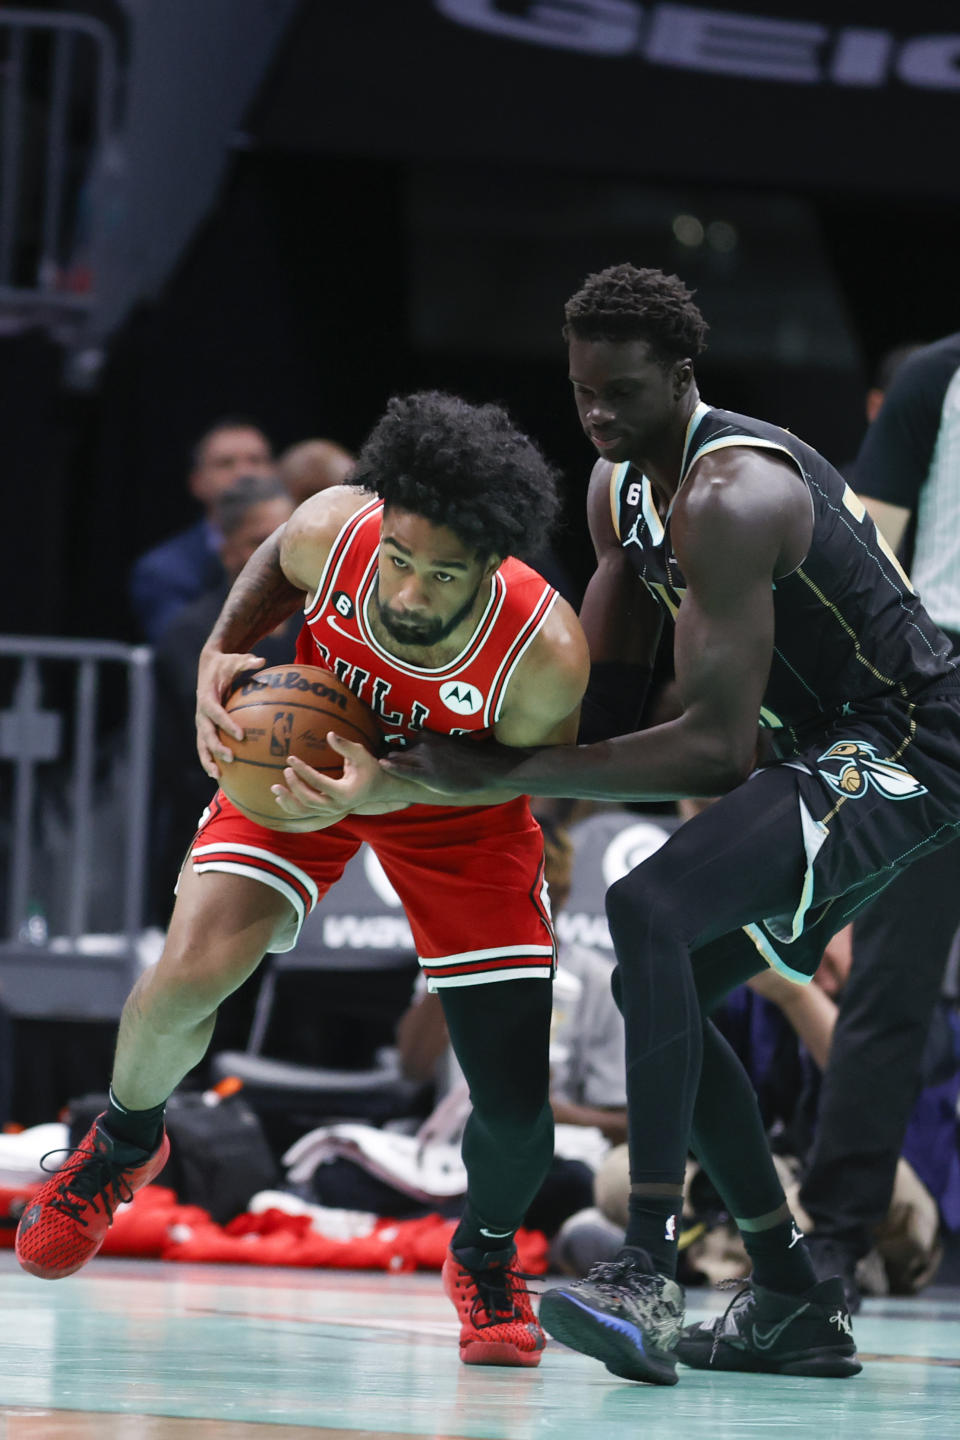 Chicago Bulls guard Coby White, left, competes against Charlotte Hornets forward JT Thor for possession of the ball during the first half of an NBA basketball game in Charlotte, N.C., Thursday, Jan. 26, 2023. (AP Photo/Nell Redmond)